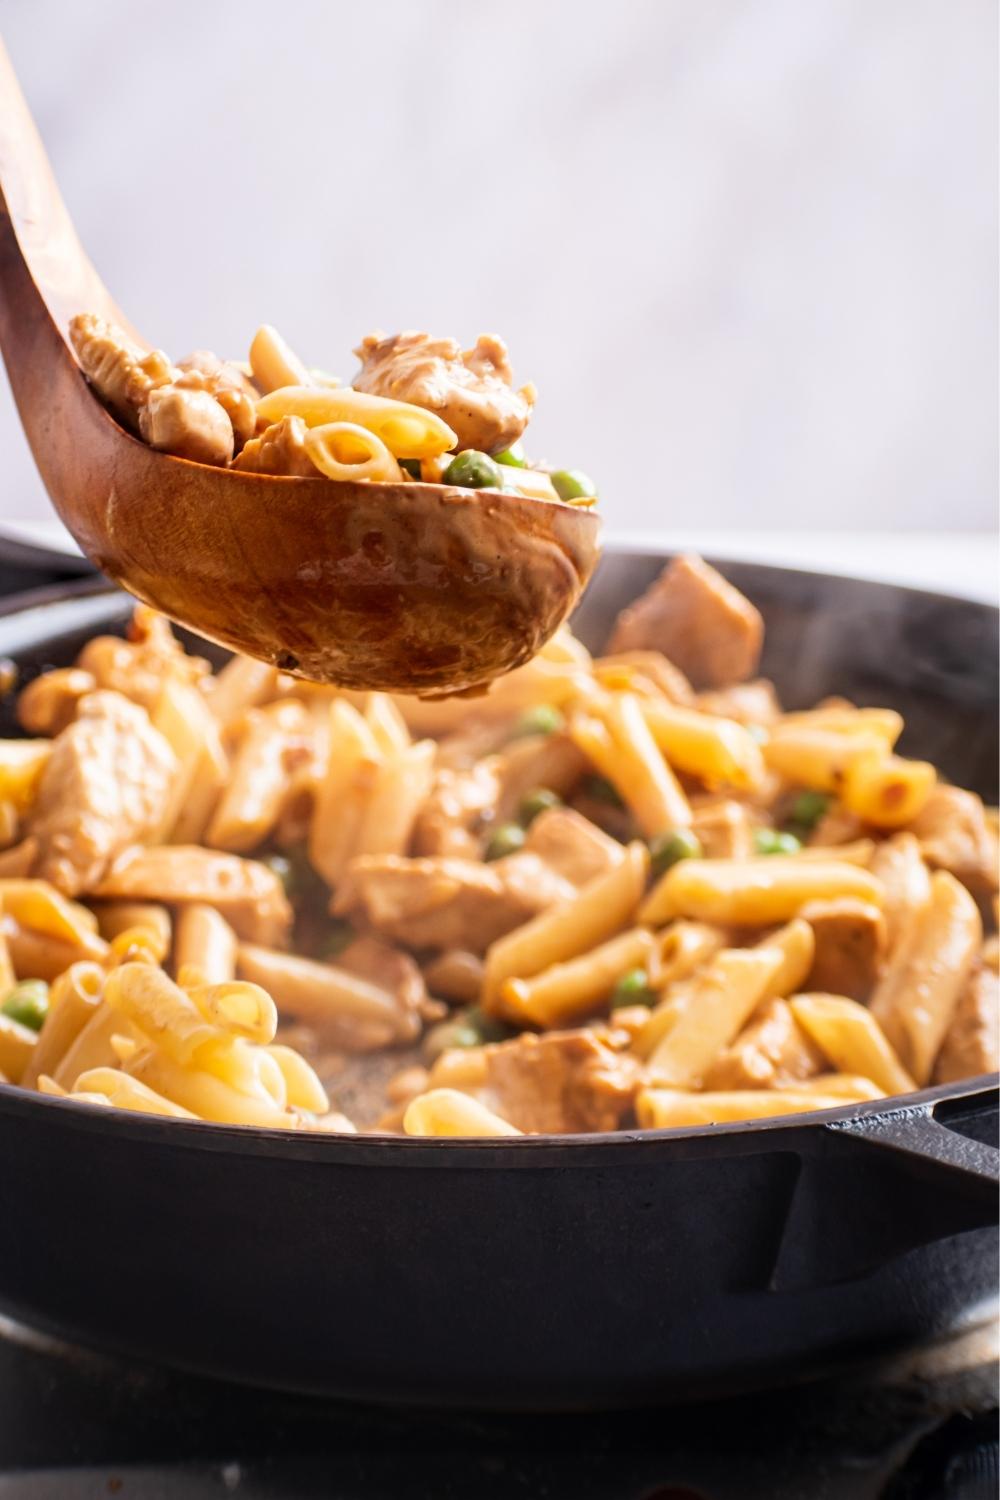 A wooden spoon with a scoop of Spicy Chicken Chipotle Pasta. A skillet is below full of the remaining Spicy Chicken Chipotle Pasta.